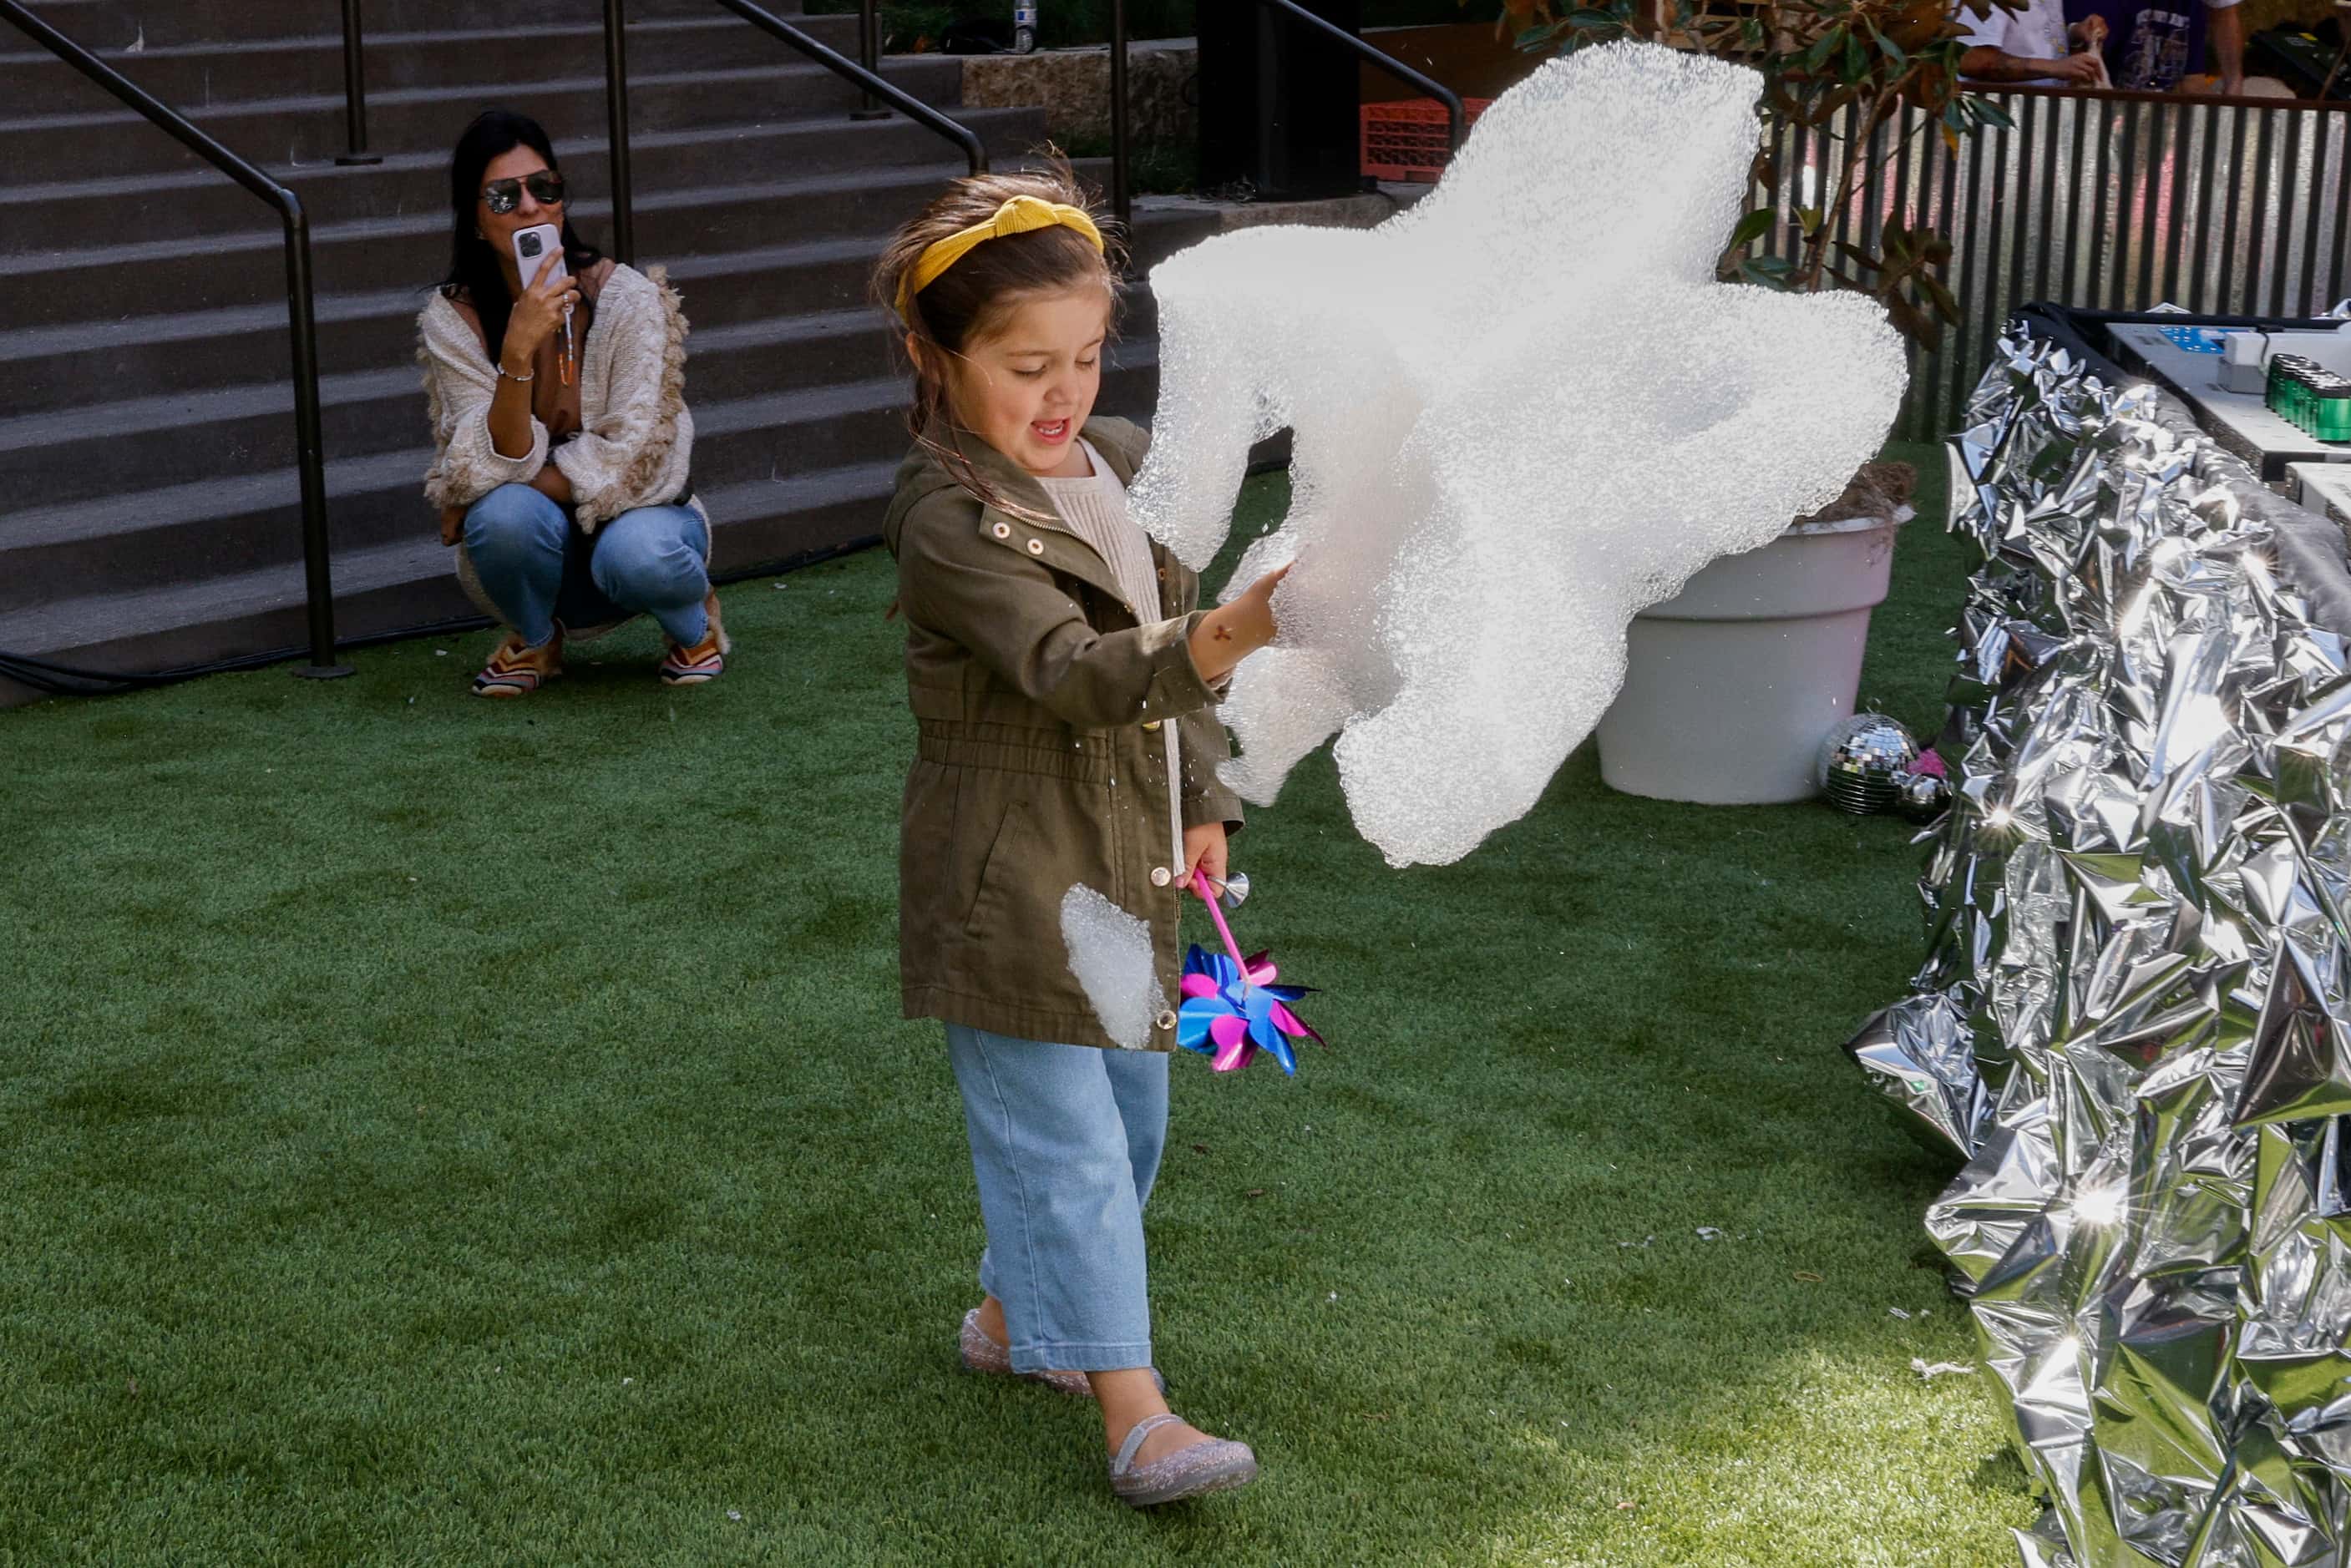 Olivia Martinez, 3, plays with bubbles as her mother Andi Martinez takes photos at the...